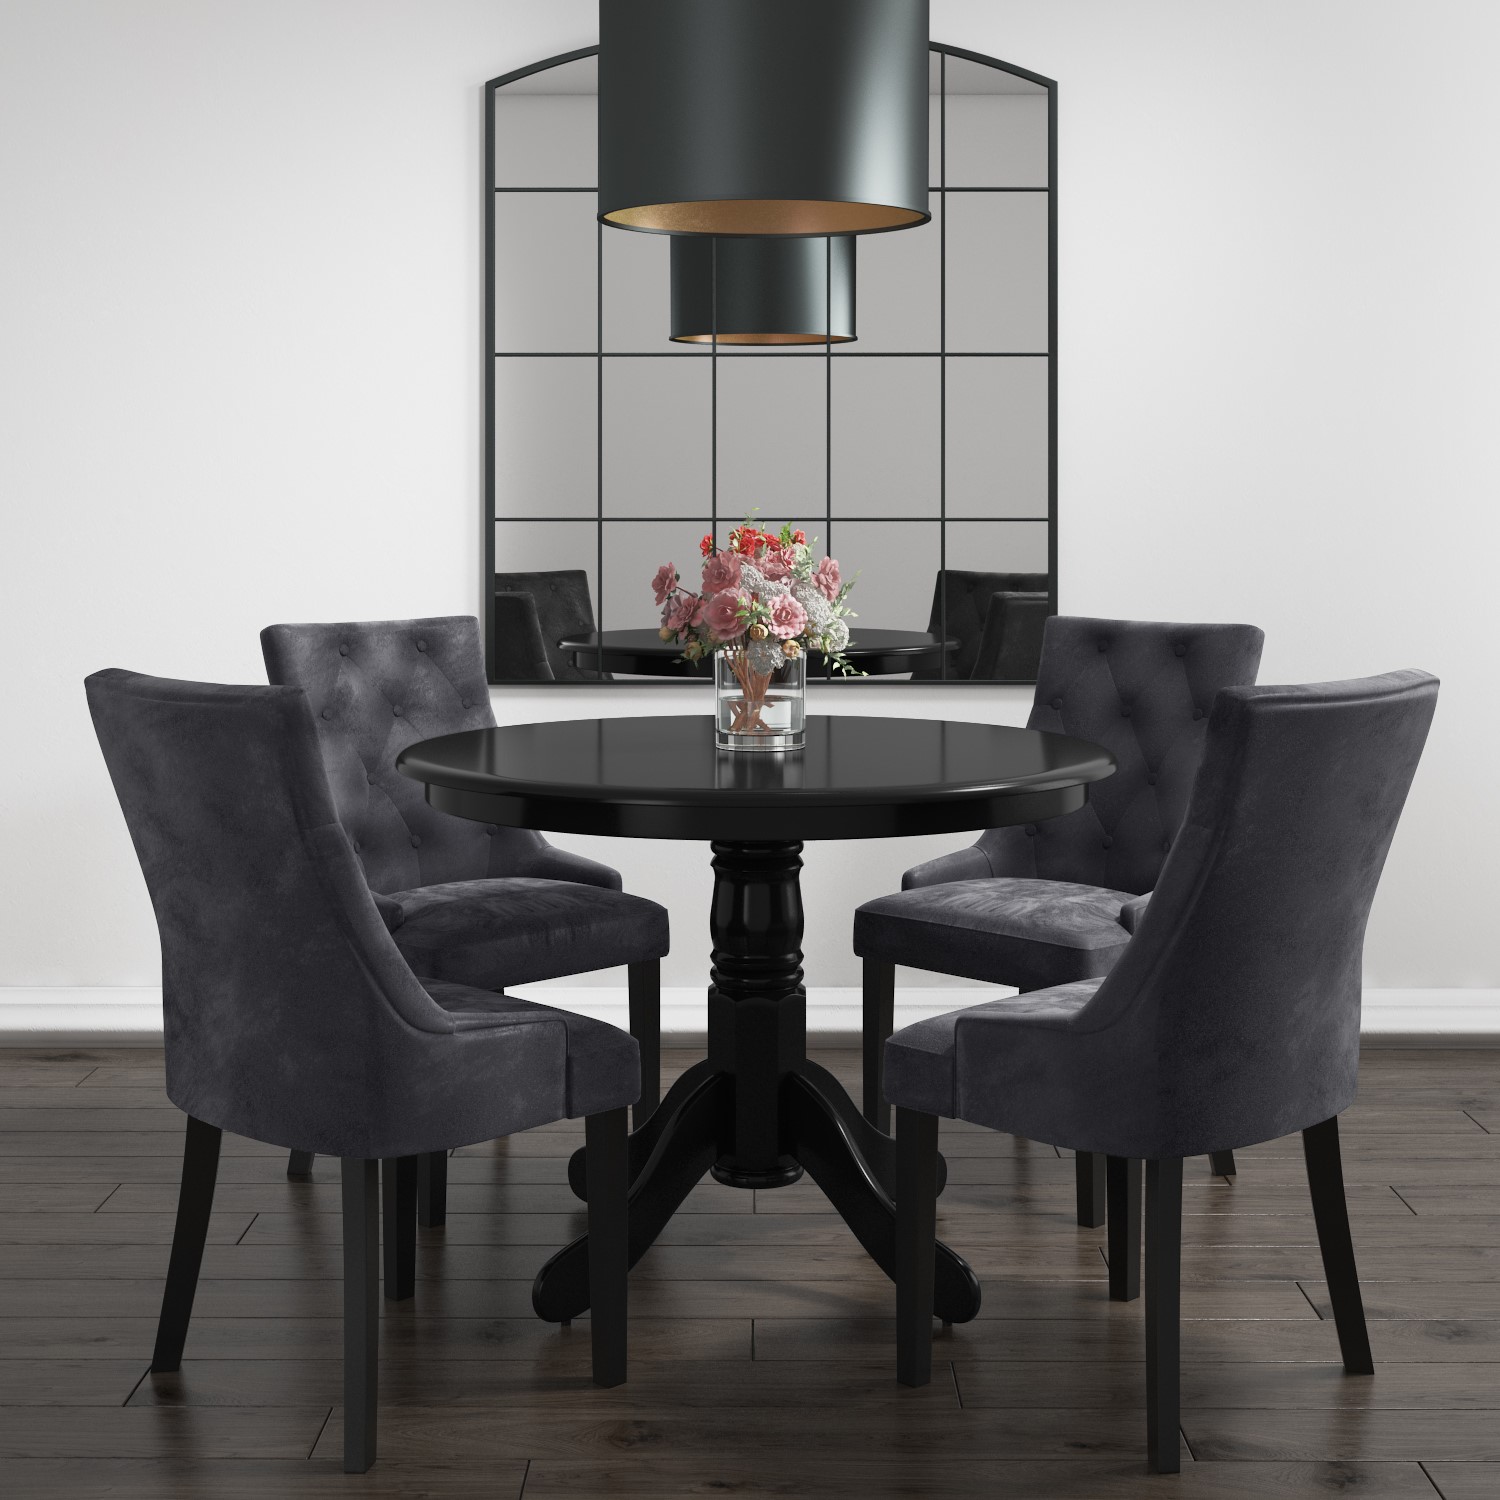 Small Round Dining Table In Black With 4 Velvet Chairs In Grey Rhode Island Kaylee Furniture123